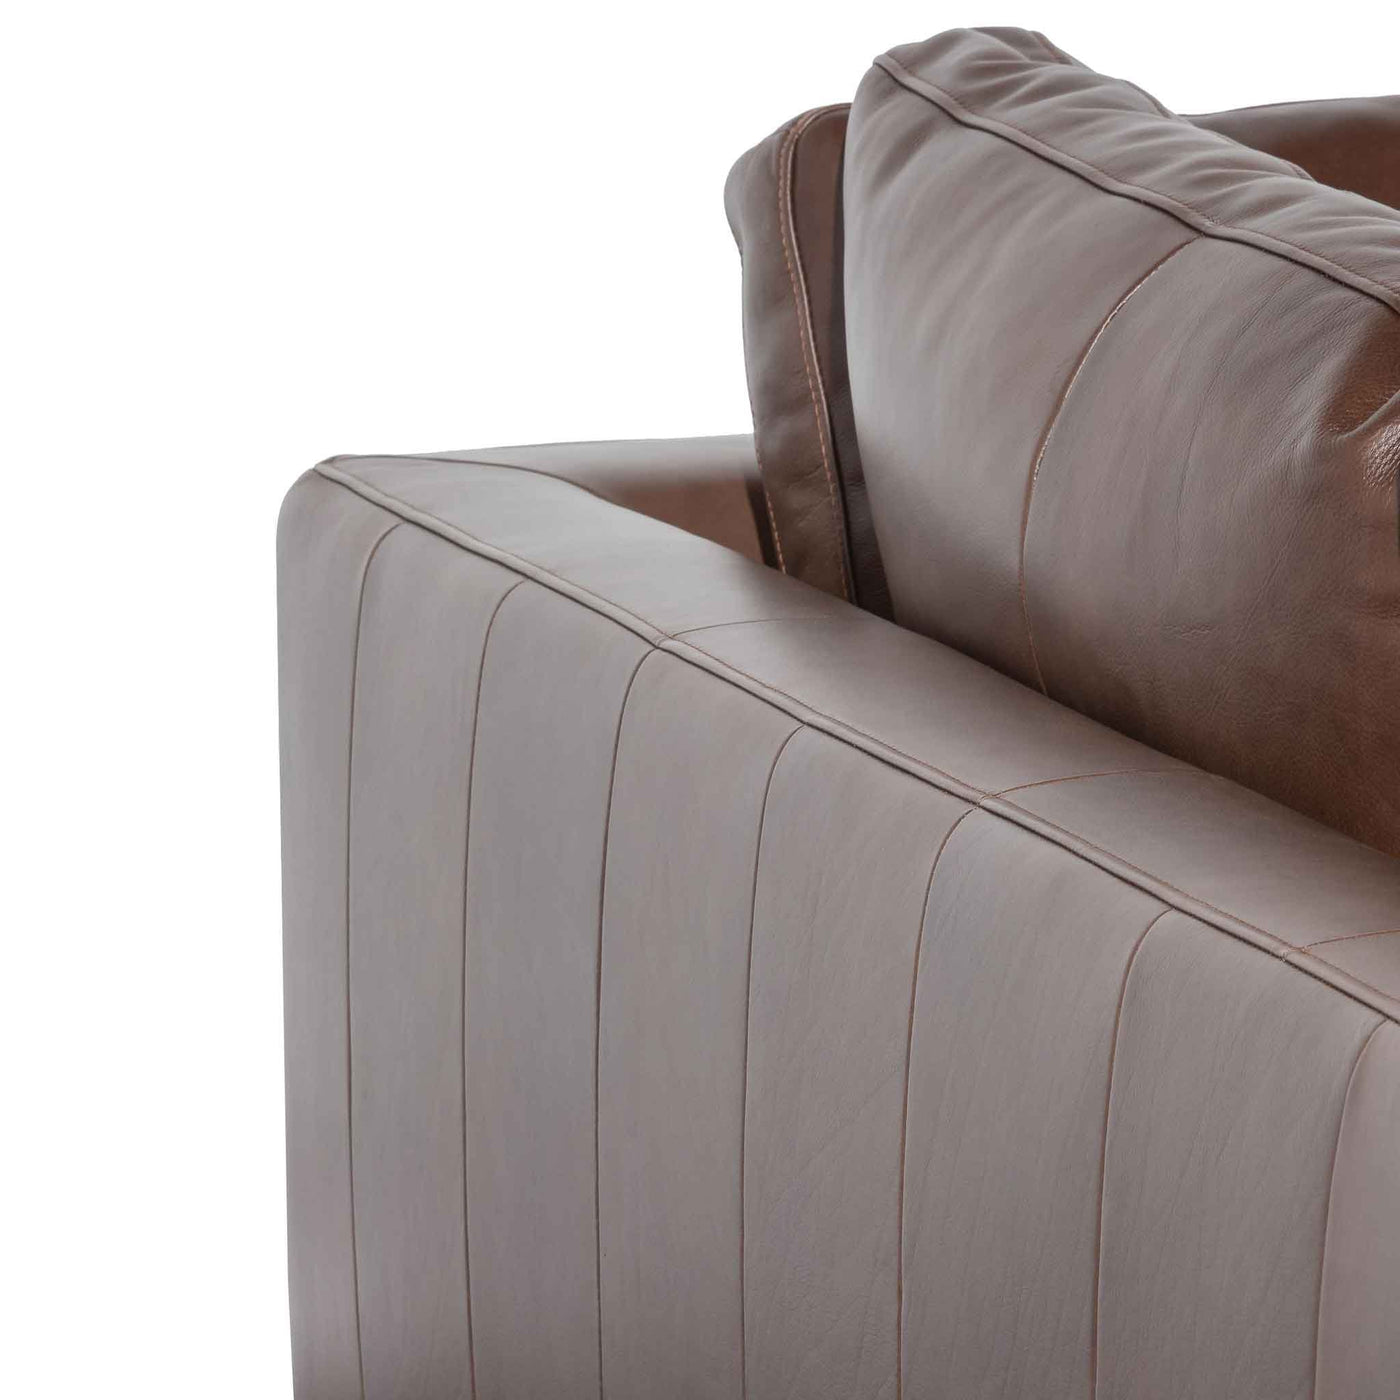 4 Seater Left Chaise Leather Sofa - Mocha Brown